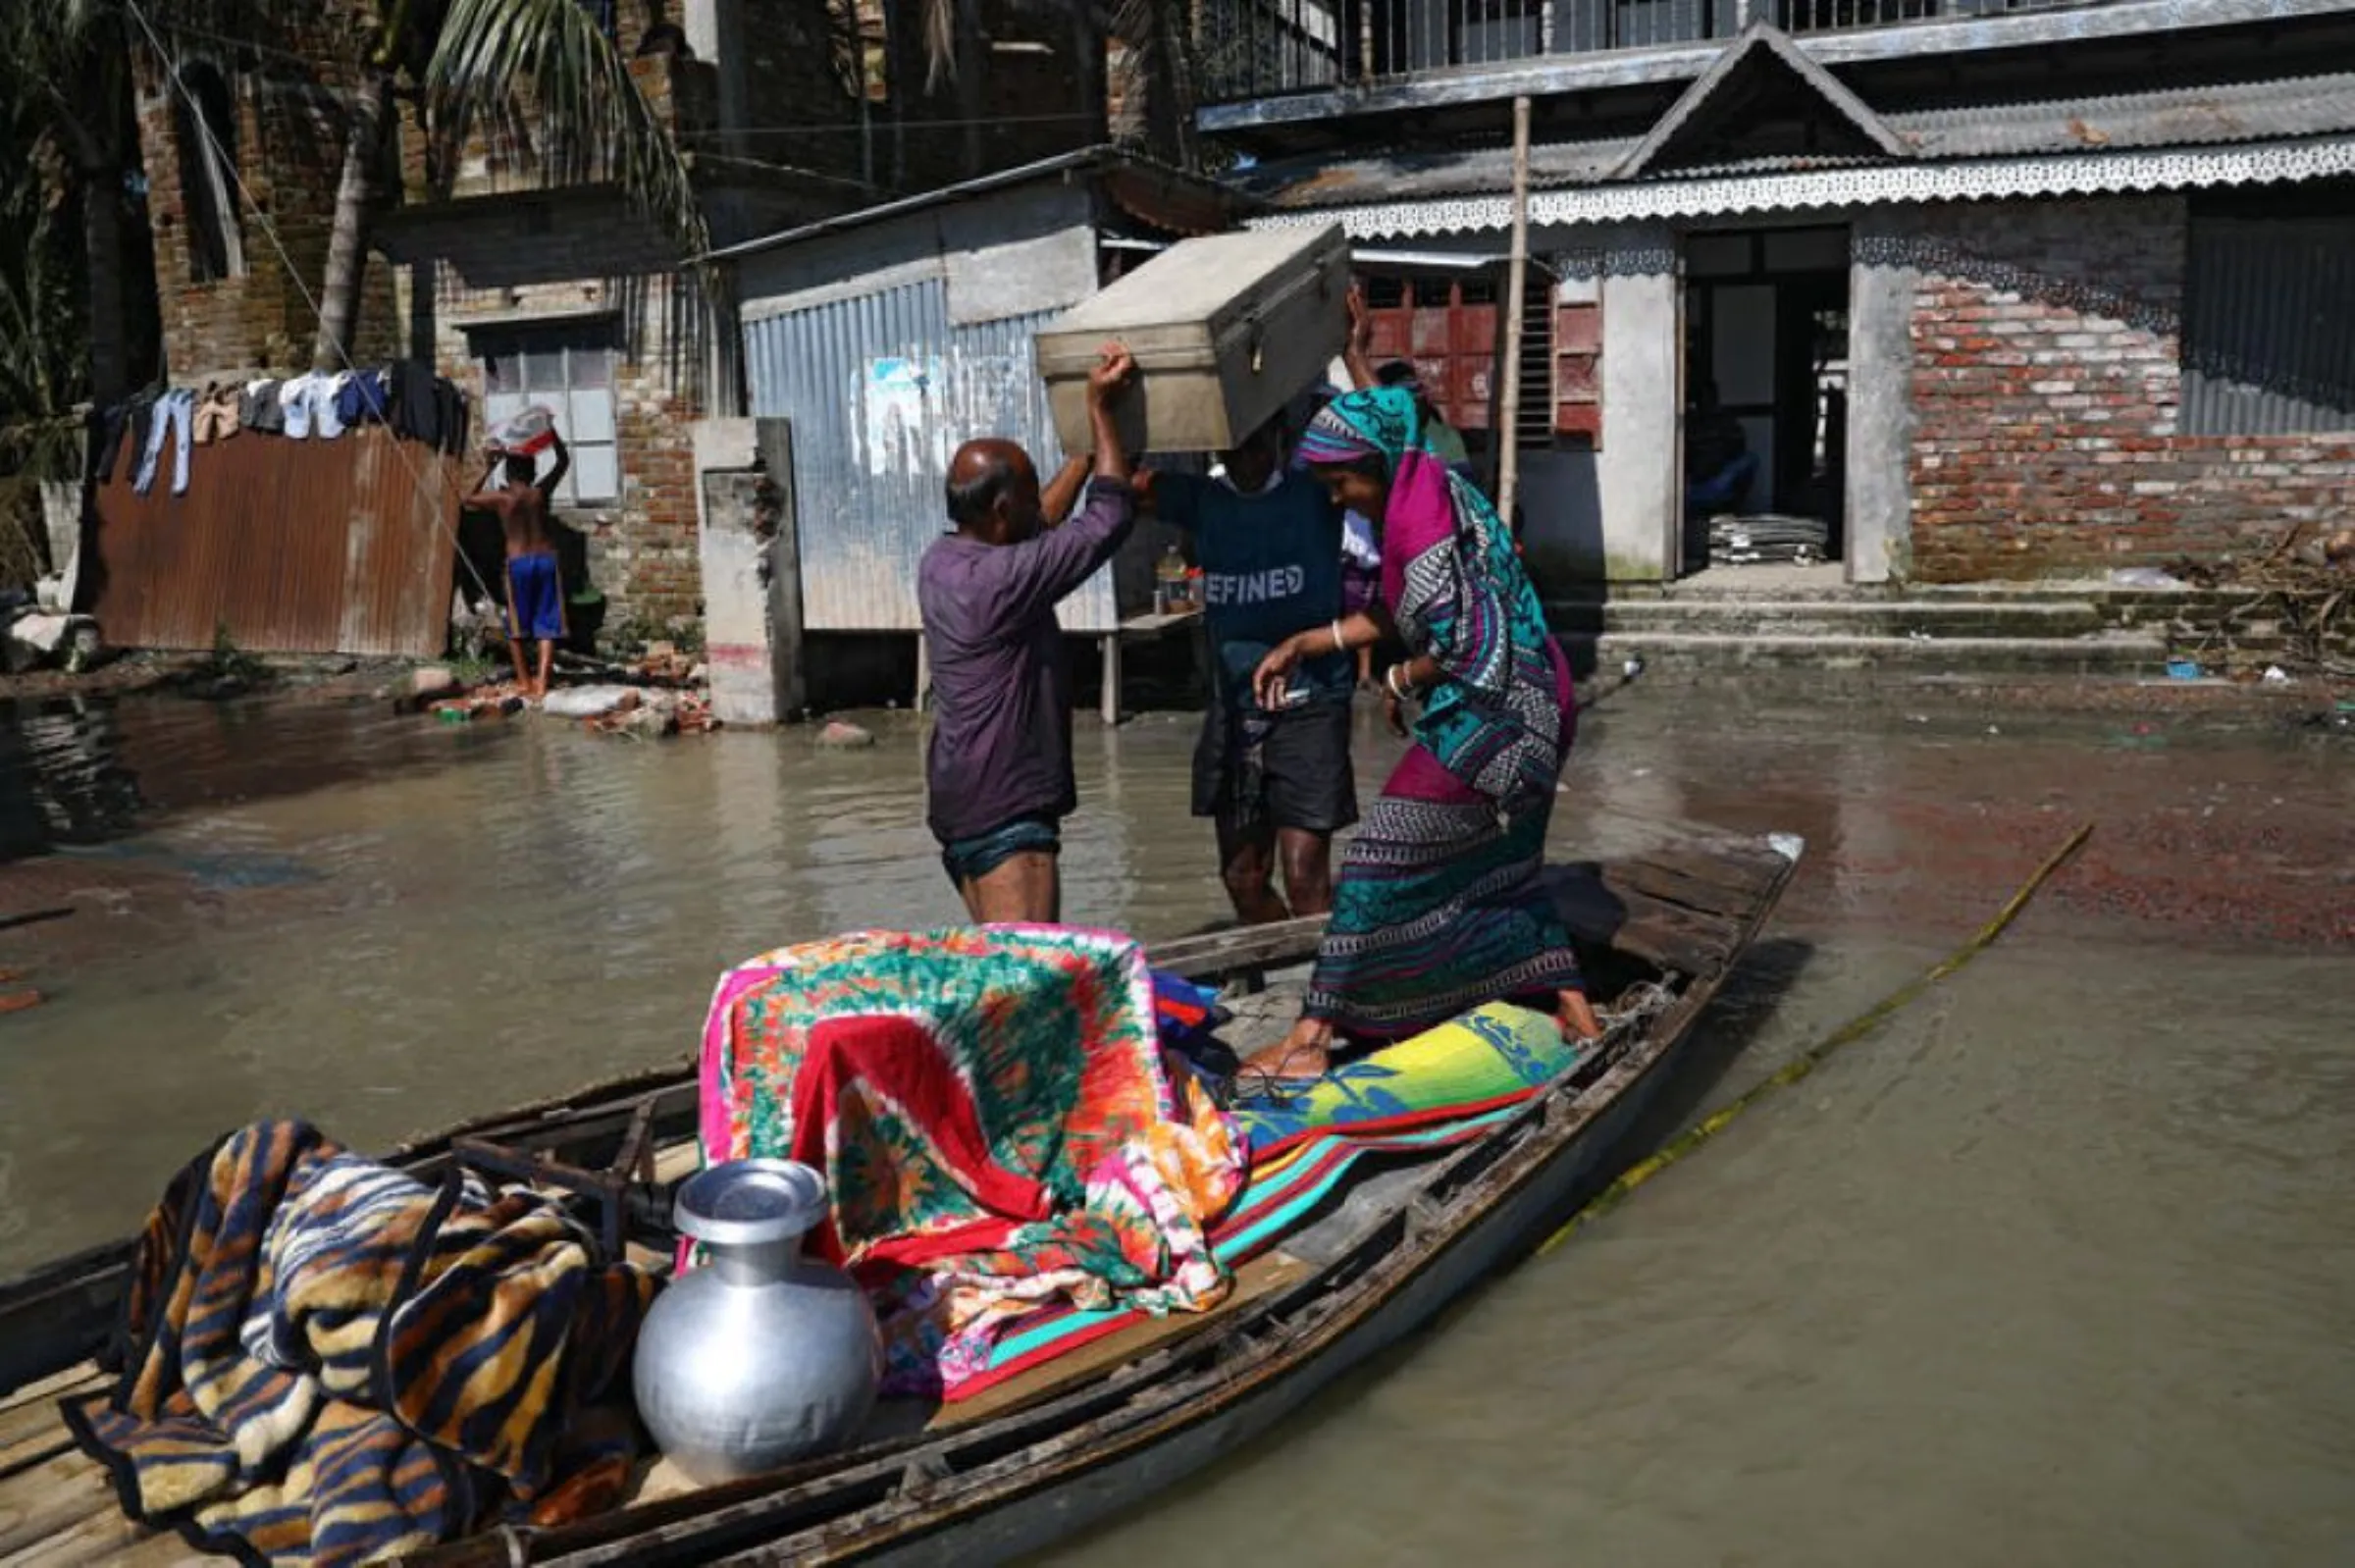 A family moves to a safe place with their belongings after the flood situation worsened in Munshiganj district, on the outskirts of Dhaka, Bangladesh, July 25, 2020